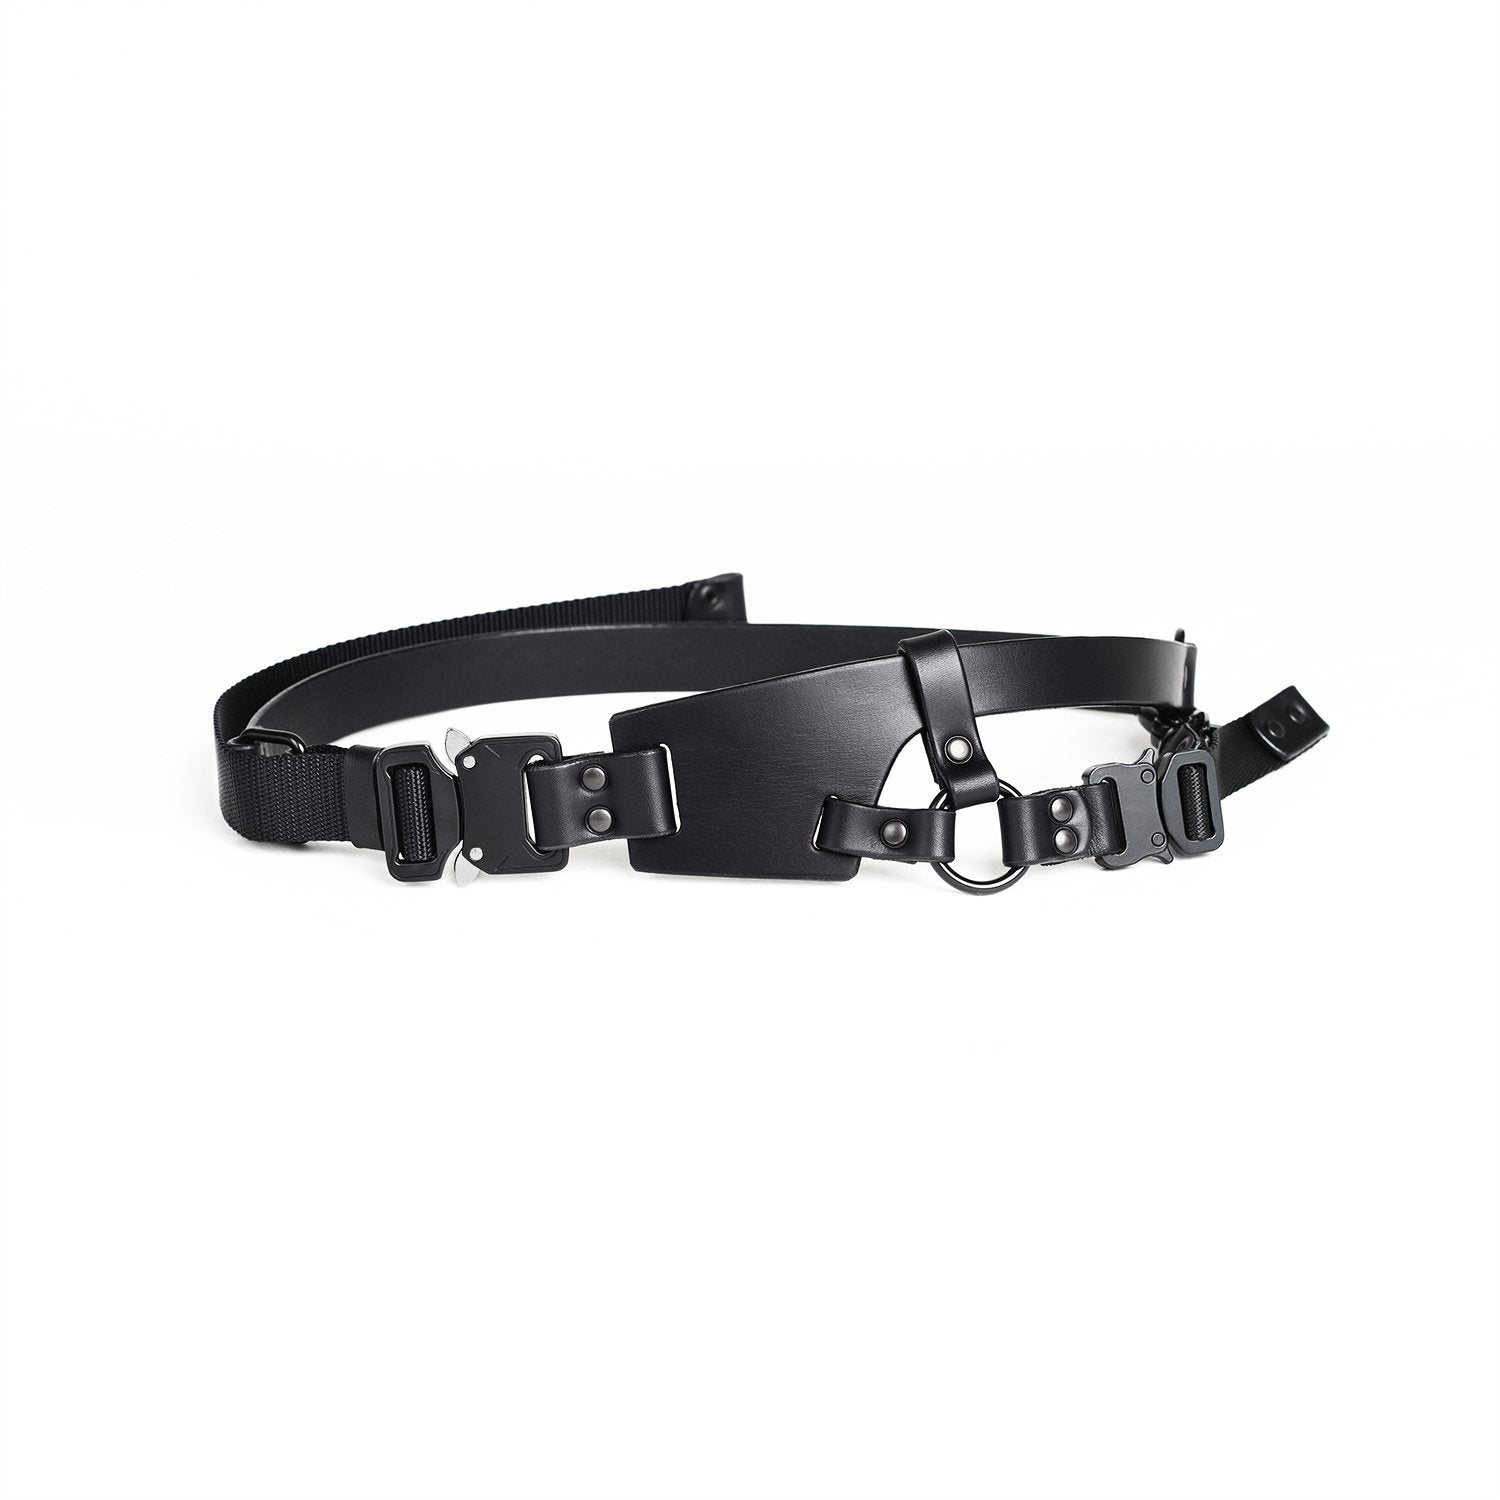 A3TEPHRA 1023BLACKComplete your style with the perfect accessory. This adjustable belt with a sleek press-release buckle and durable nylon webbing is the finishing touch you need. HanAccessori UnisexLA HAINE INSIDE USTEPHRAA3TEPHRA 1023BLACK